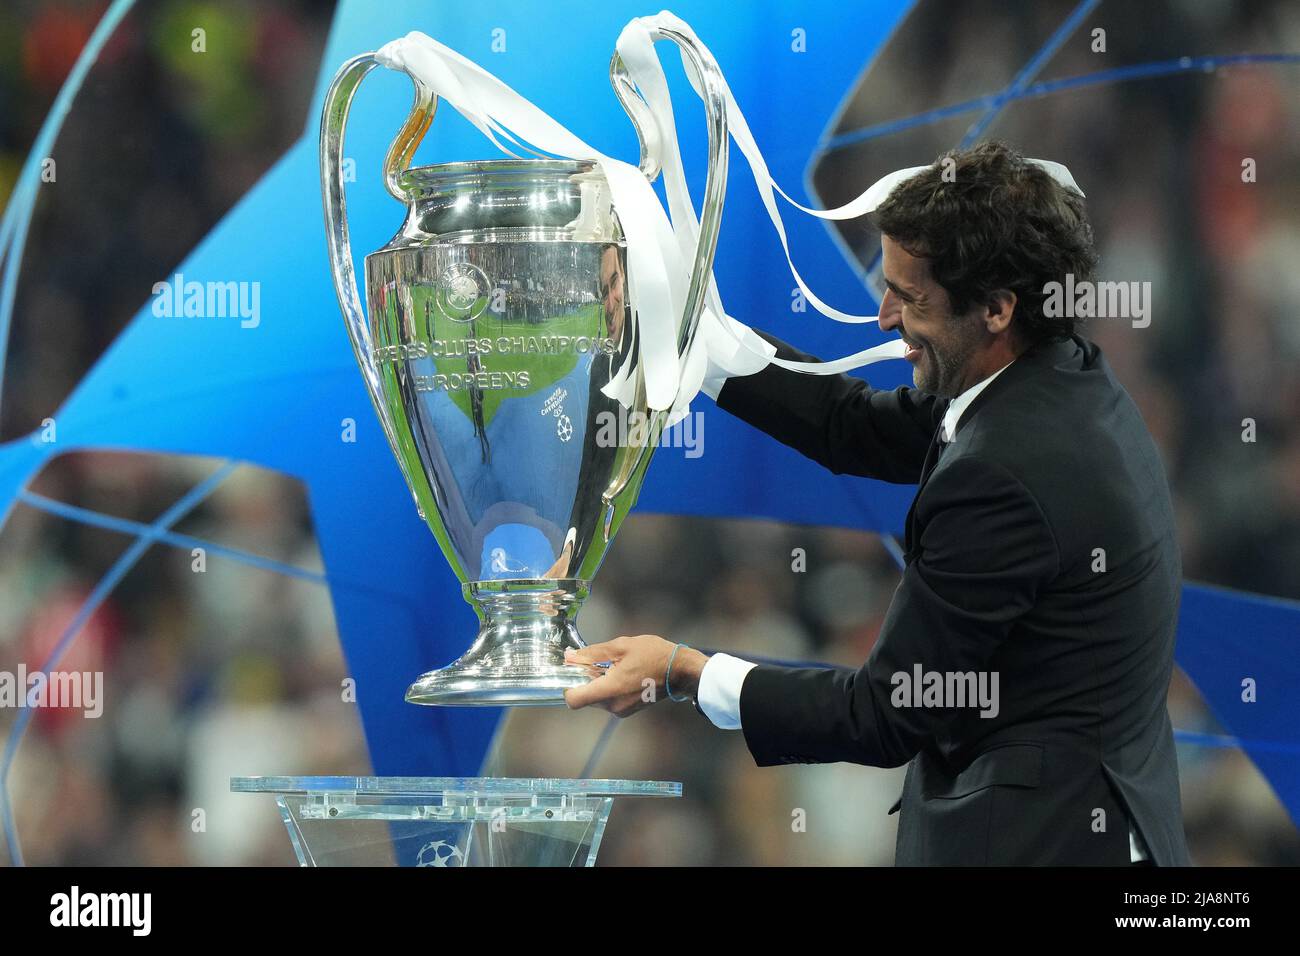 Saint Denis, France. 28th May, 2022. Raul Gonzalez Blanco of Real Madrid brings the Champions League trophy on the pitch during the UEFA Champions League match between Liverpool v Real Madrid at the Stade de France on May 28, 2022 in Paris France Credit: Giuseppe Maffia/Alamy Live News Stock Photo